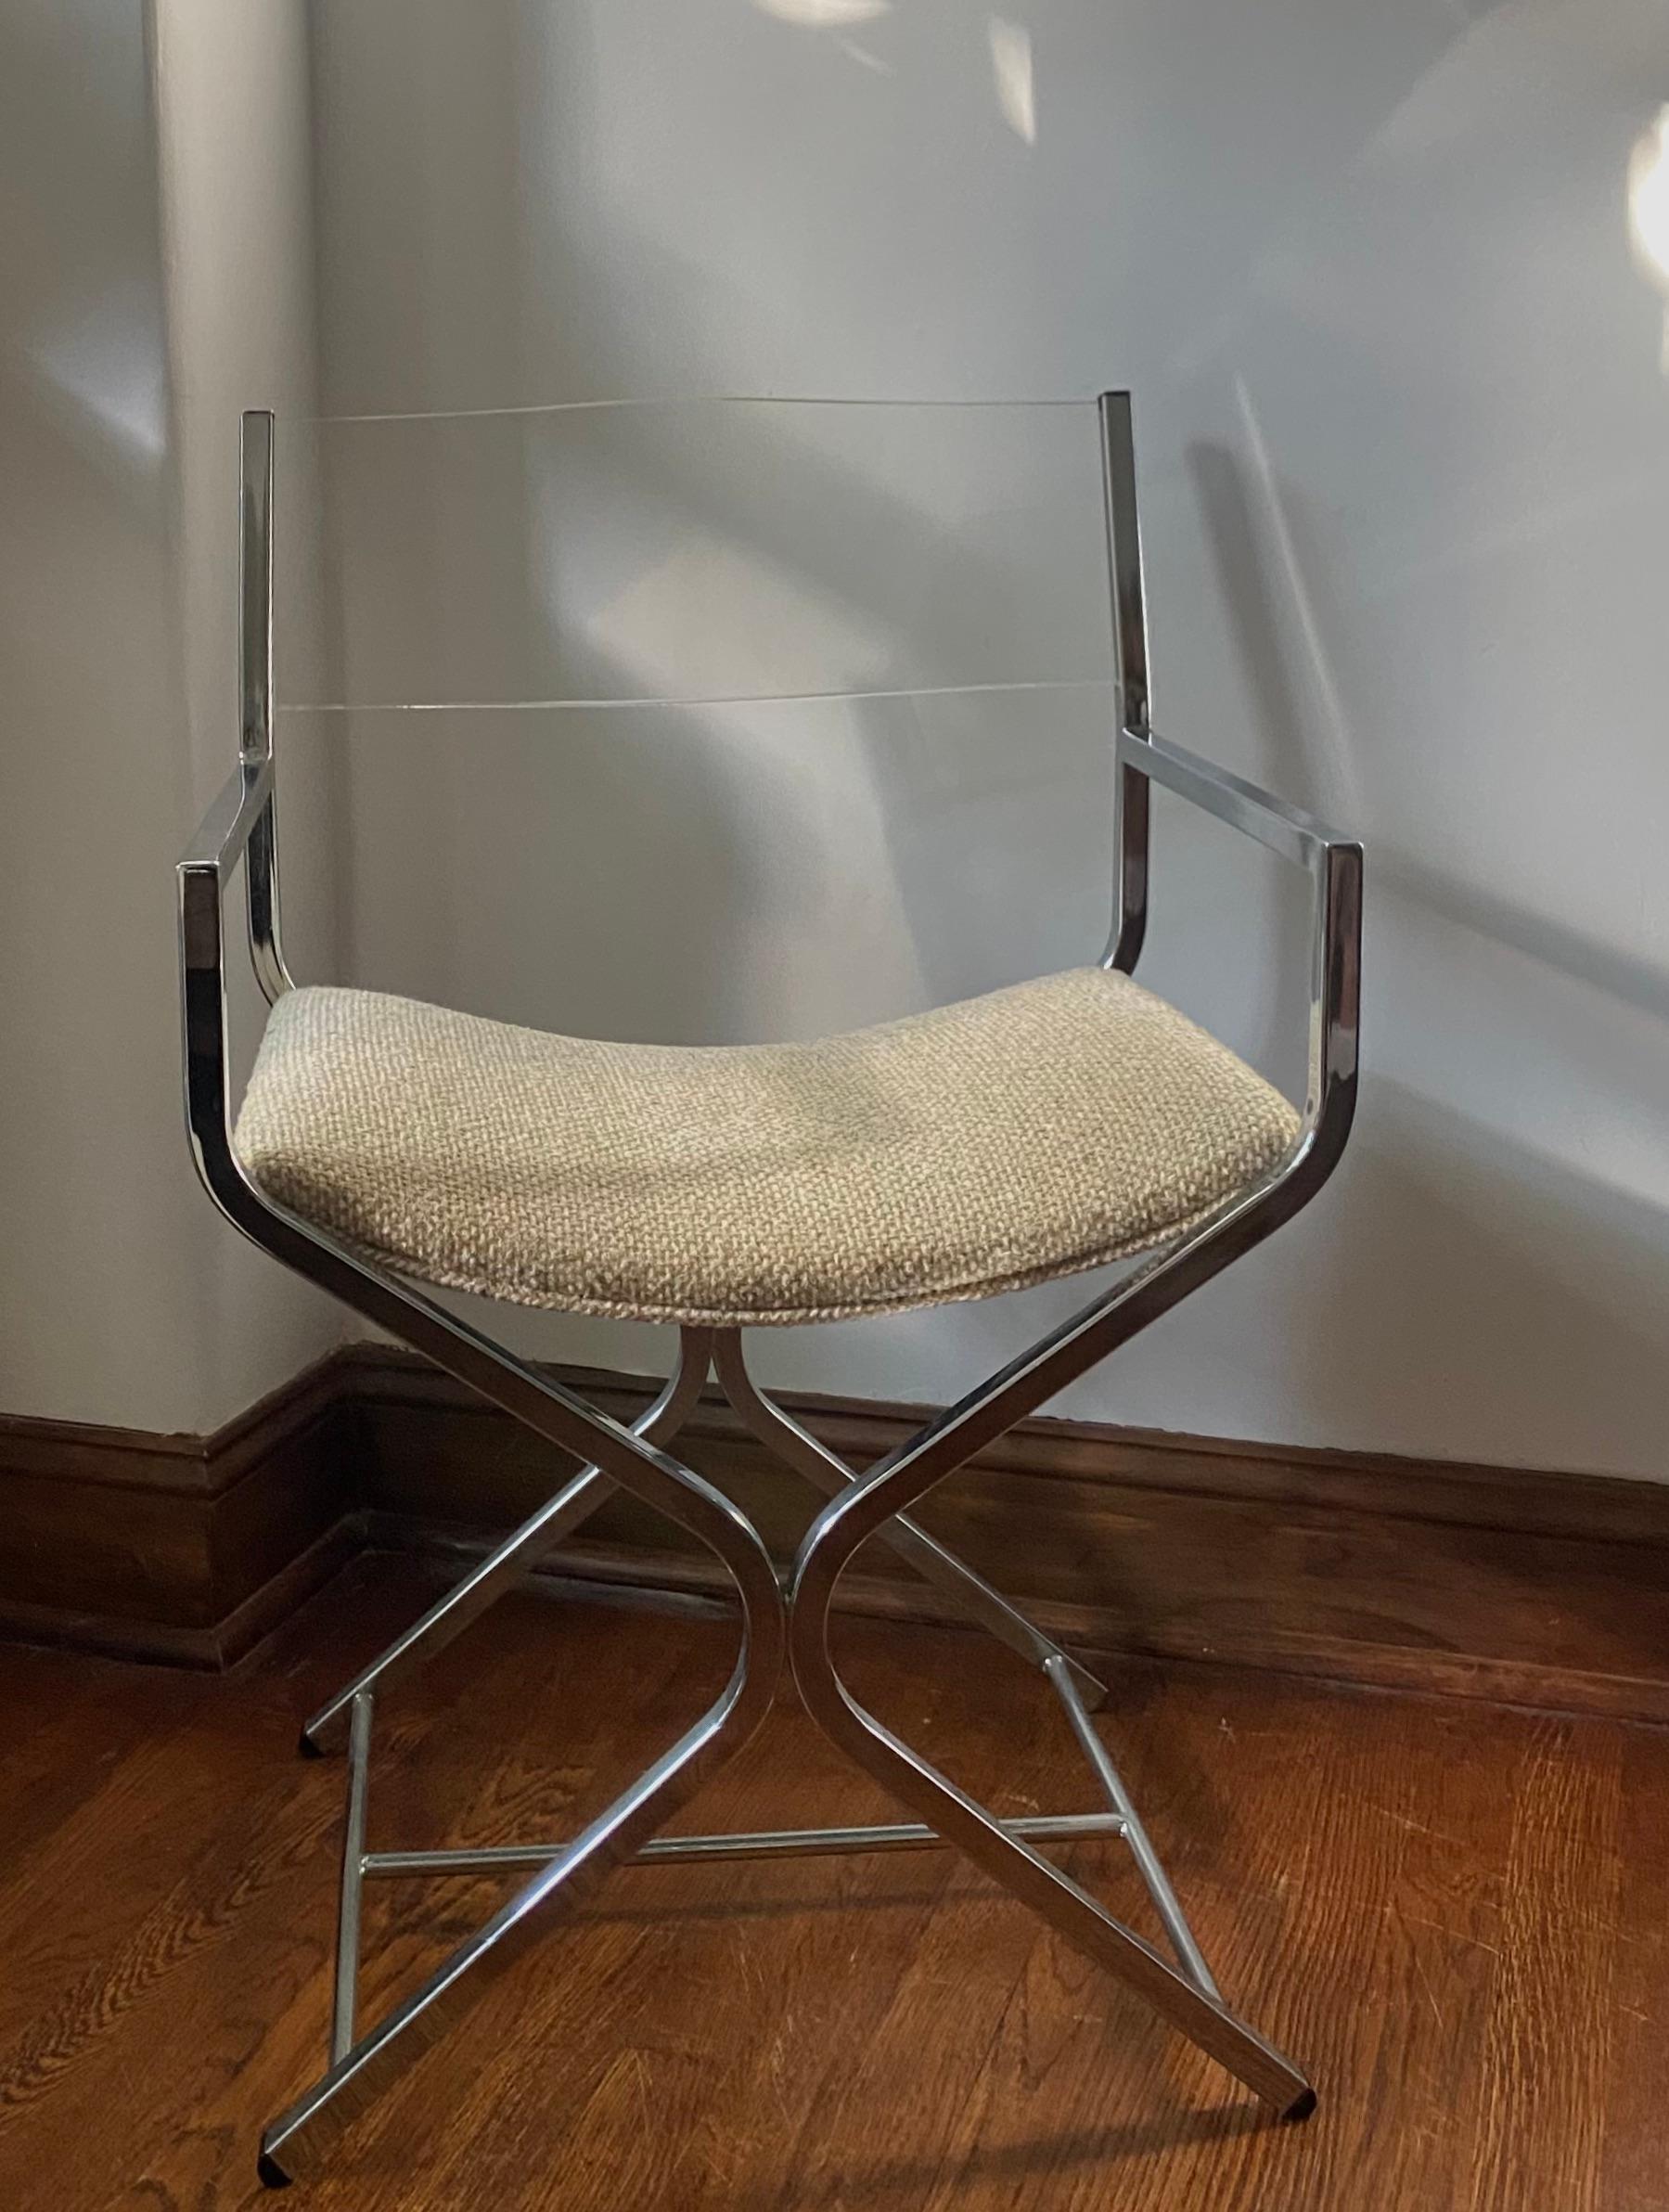 1970s Lucite and Chrome X directors chair - this vintage director's chair is a true testament to timeless design. With its sleek chrome frame, lucite backrest, and oatmeal seat cushion, it embodies the clean lines and modern aesthetic of mid-century